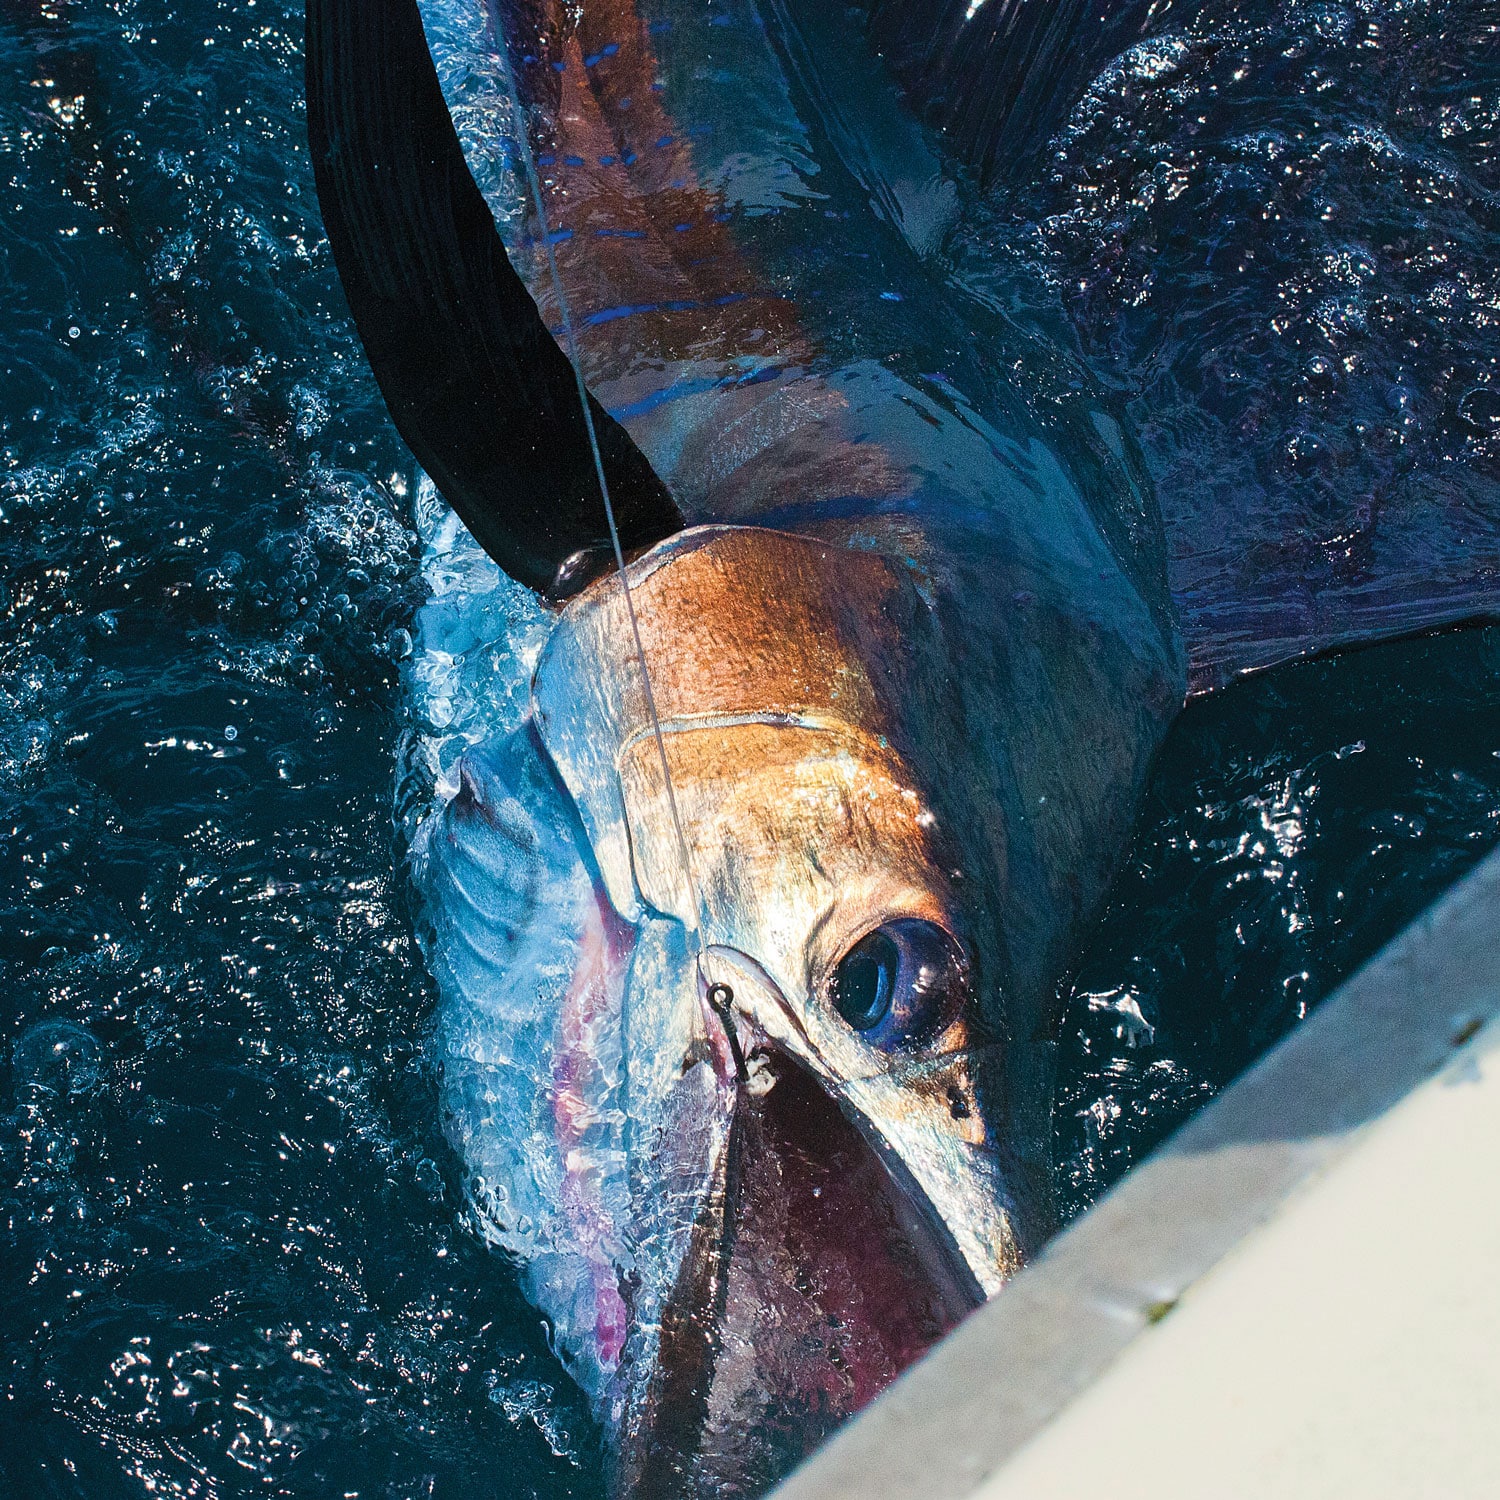 500-Pound Marlin Surprise - Offshore Fishing an Uninhabited Coast in Panama  